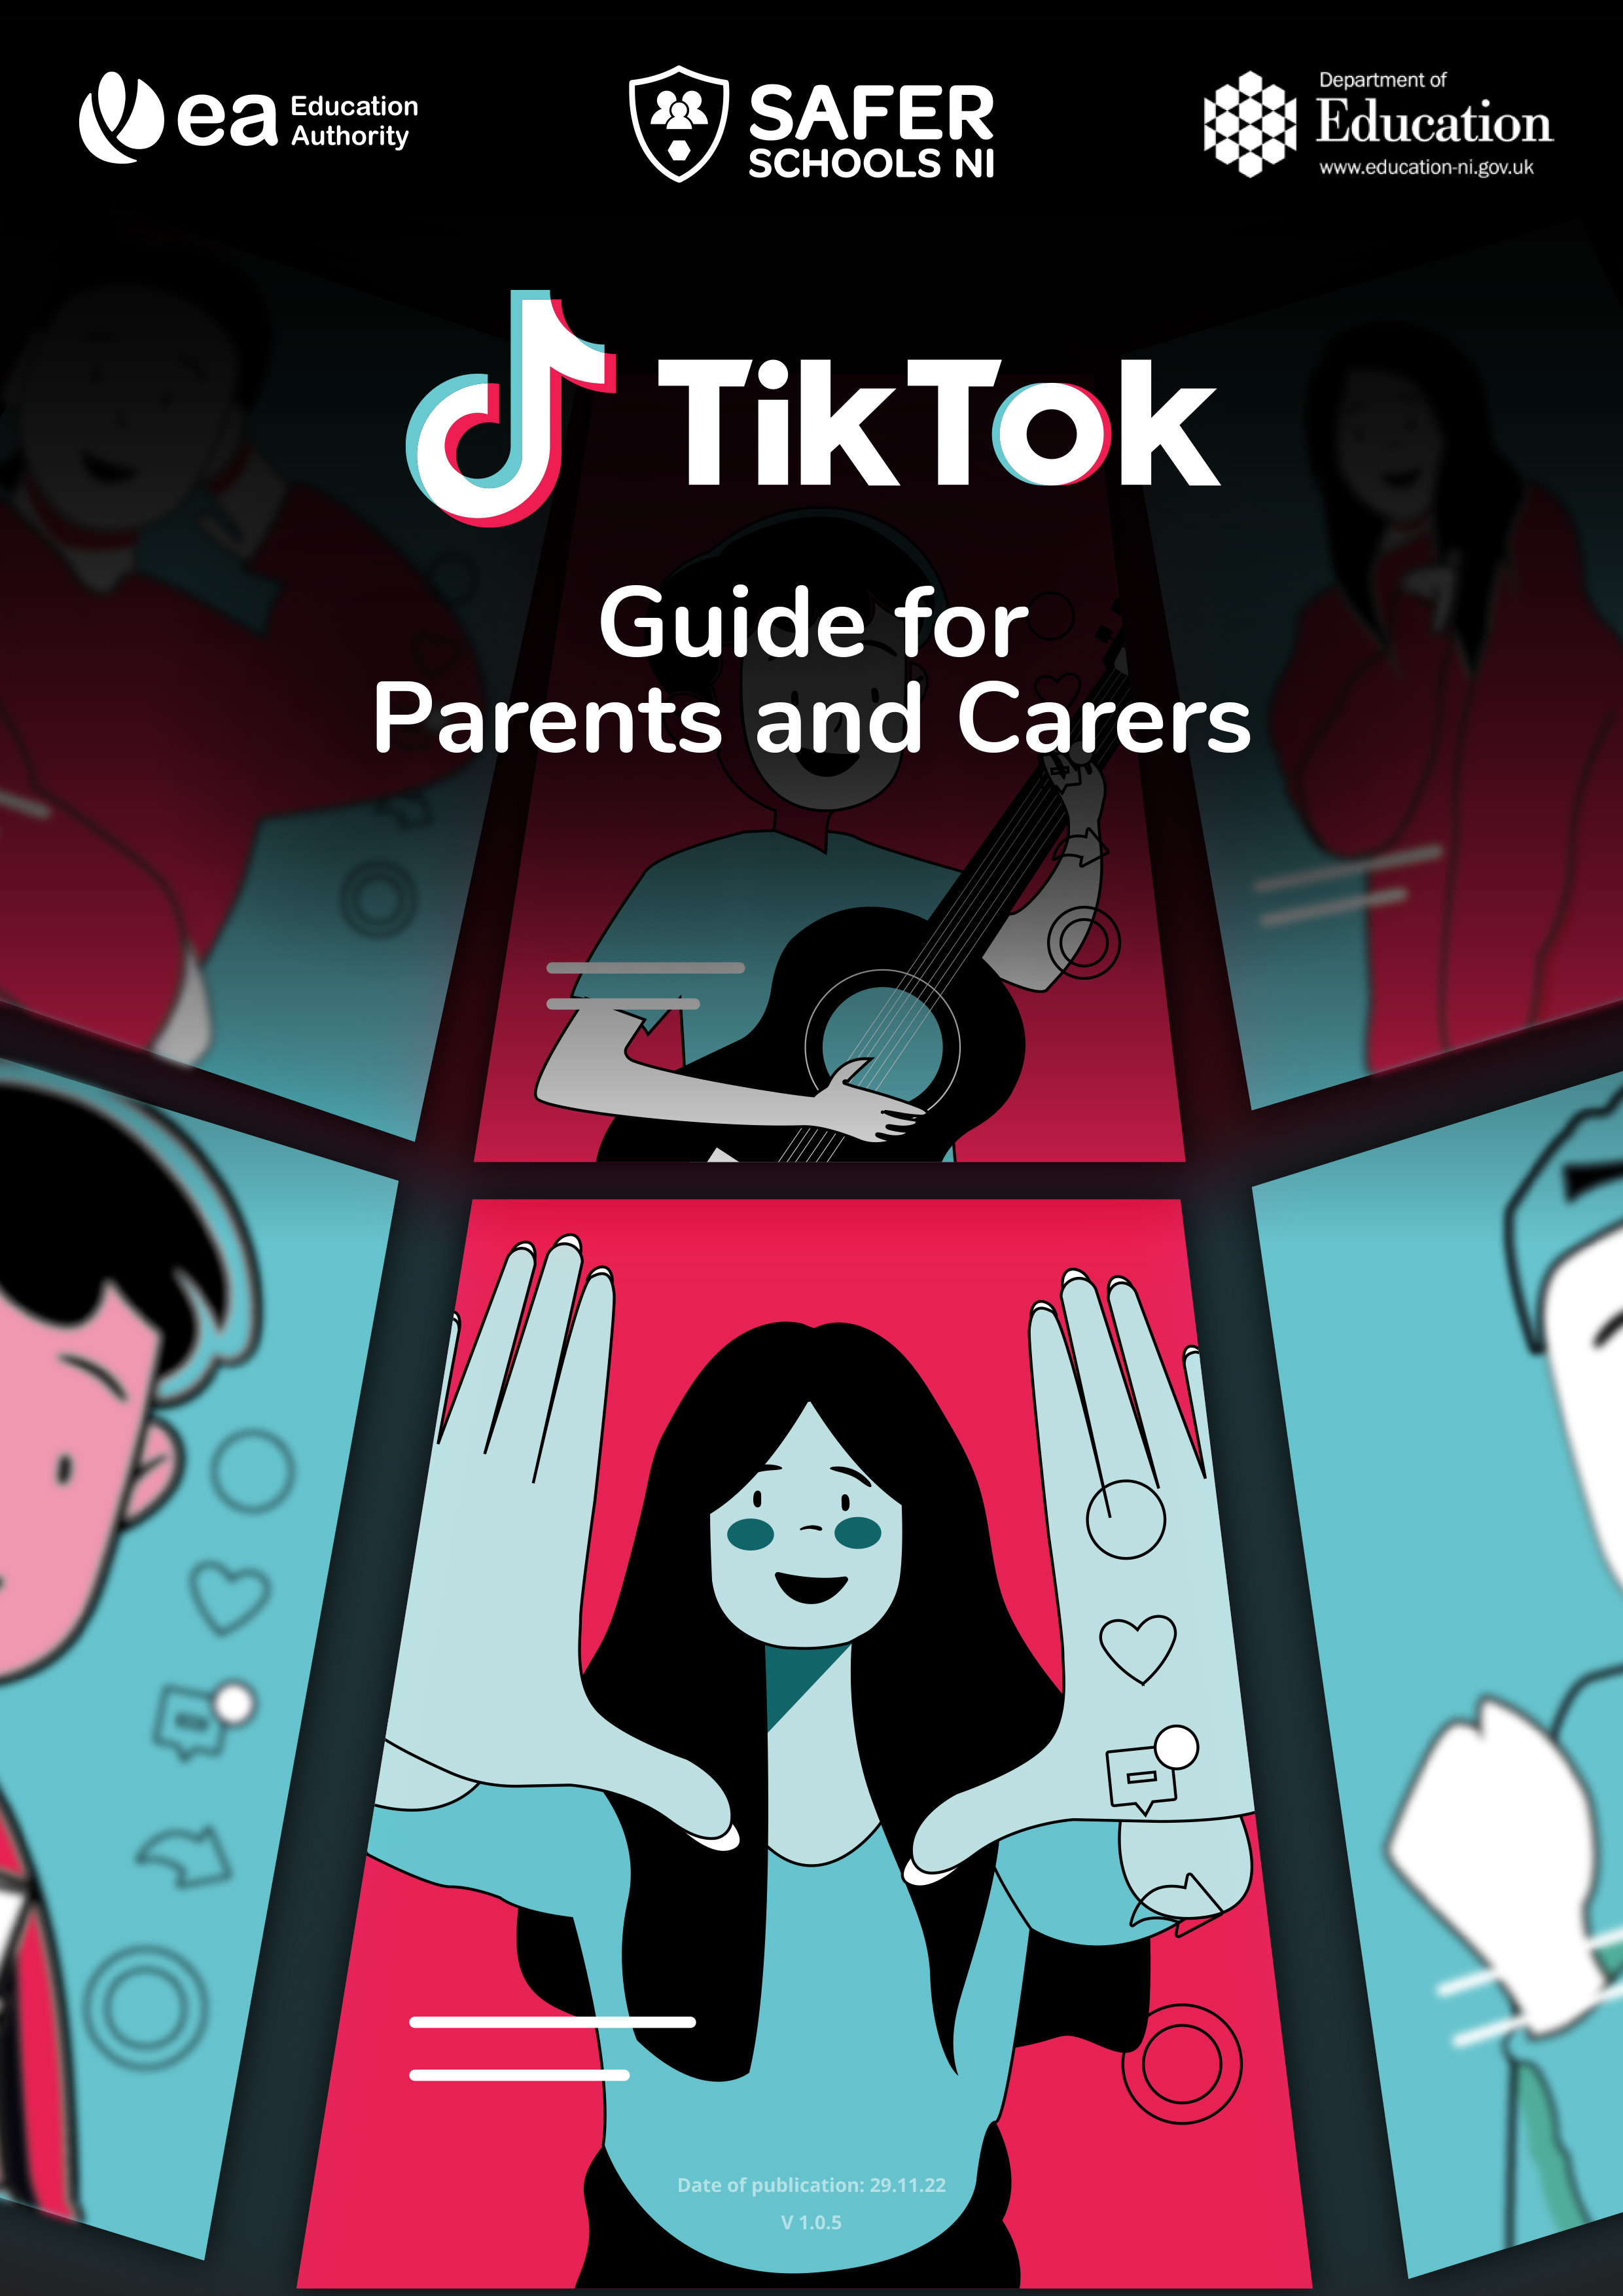 EA_TikTok_Guide_For_Parents and Carers-1.jpg